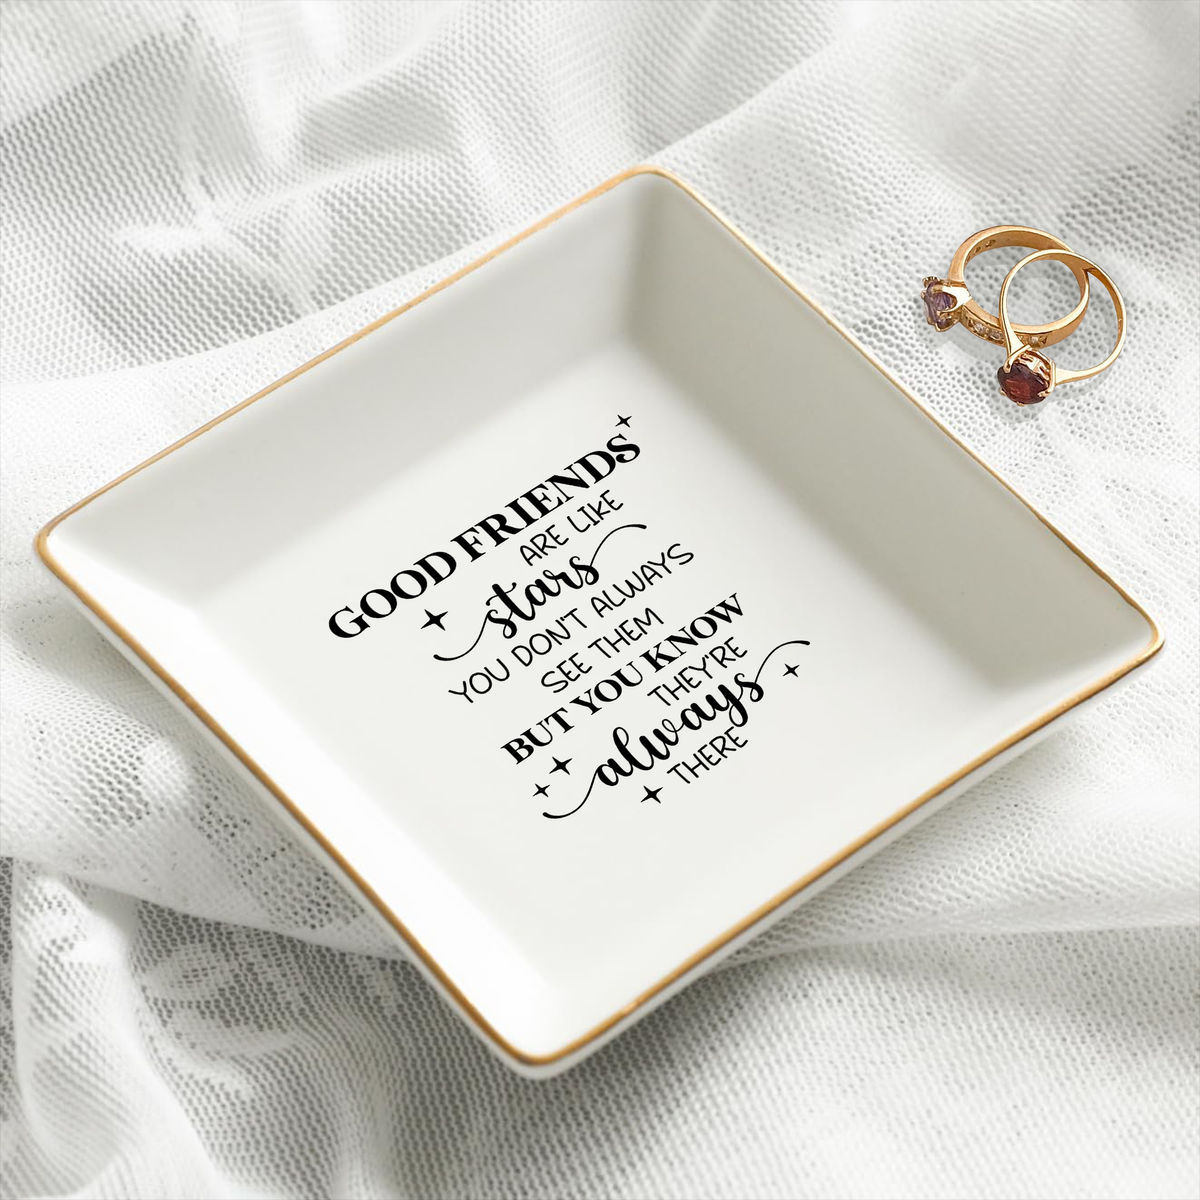 Jewelry Tray - Birthday Gift for Her, Gift for Sister Friend Bestie, Wedding Gifts - Good Friends are like Stars_1